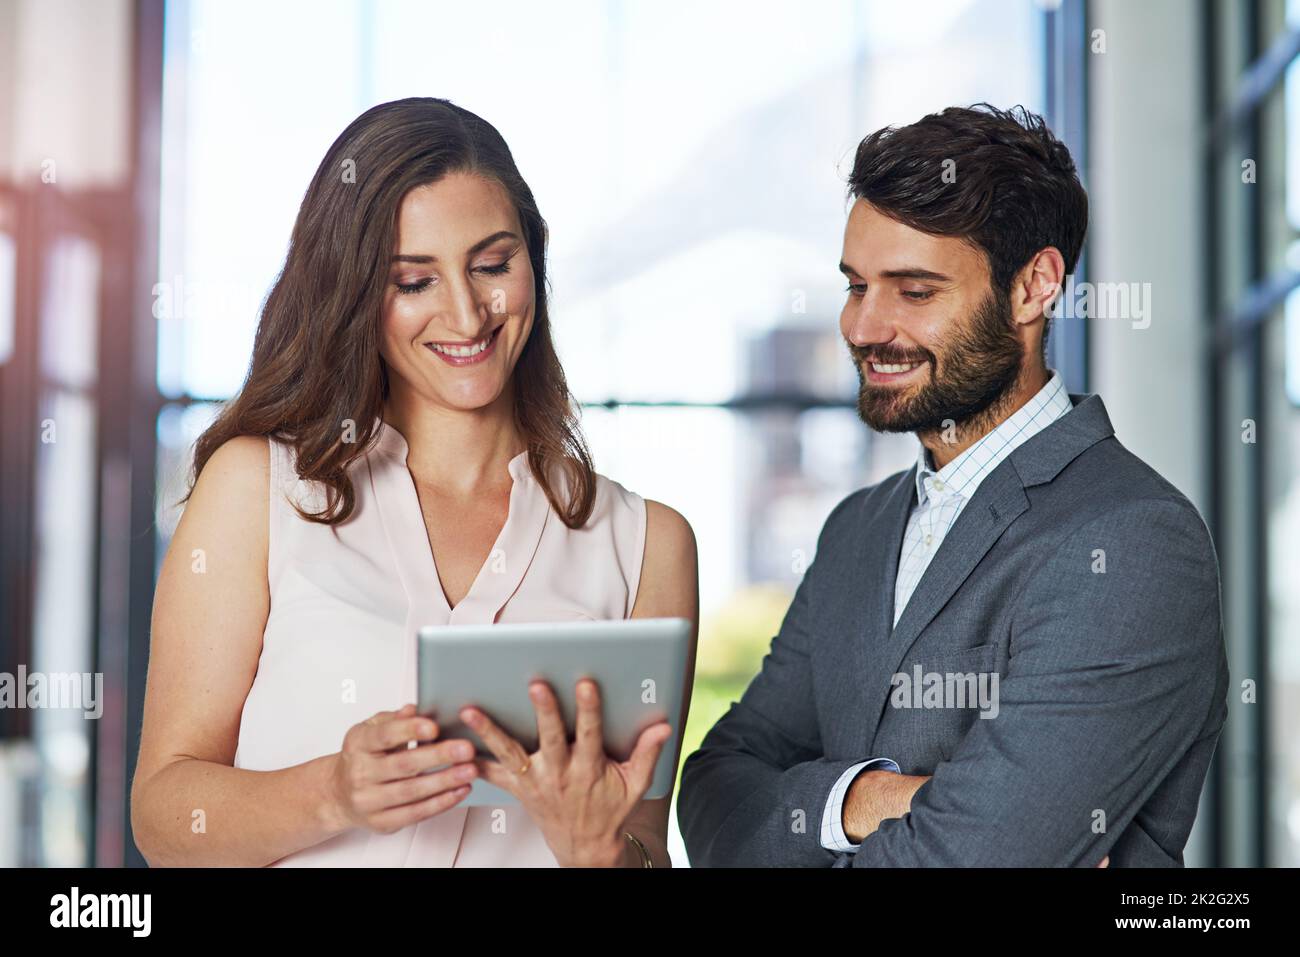 Smart executives use smart technology. Shot of a young businessman and businesswoman using a digital tablet together in an office. Stock Photo